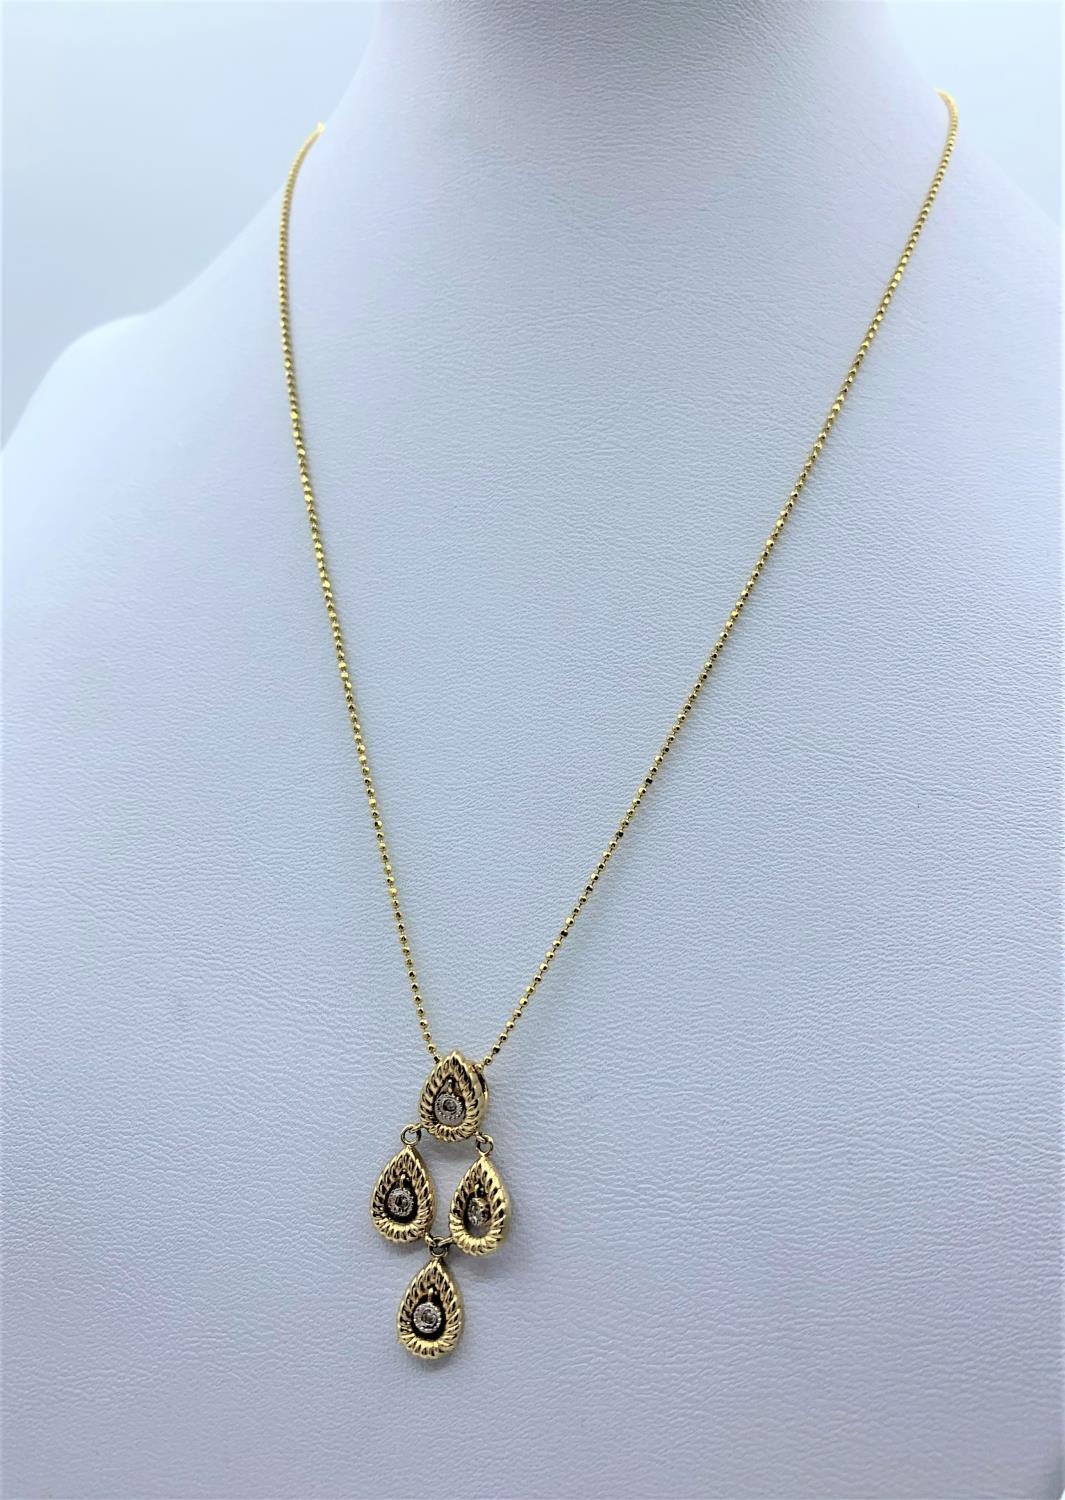 Diamond Drop Pendant in 18K Gold on a 9K Gold Chain, weight 3.1g and 36cm long chain